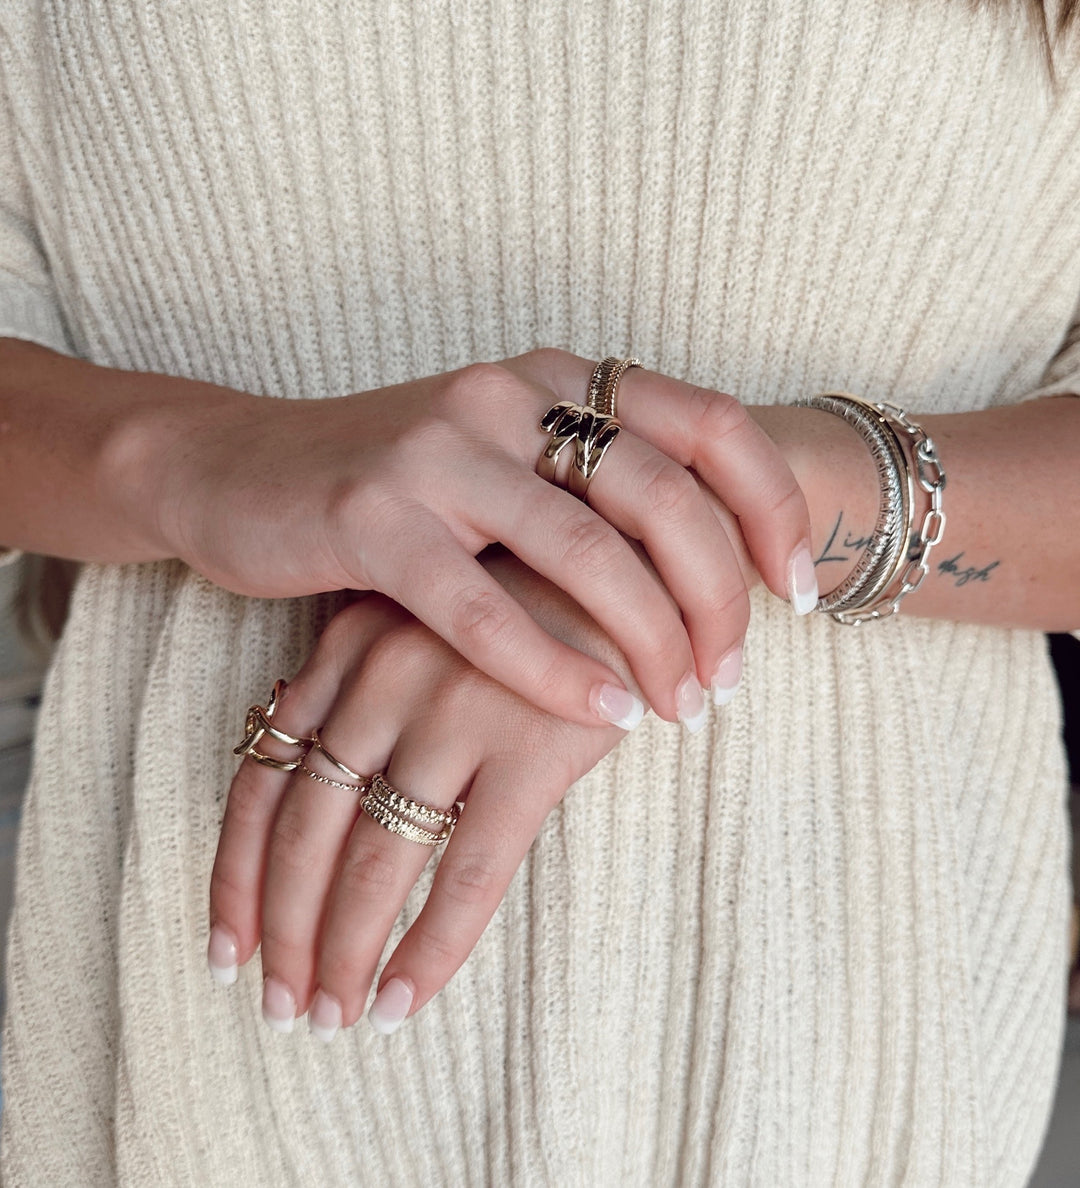 hand model wearing stackable rings and bracelets